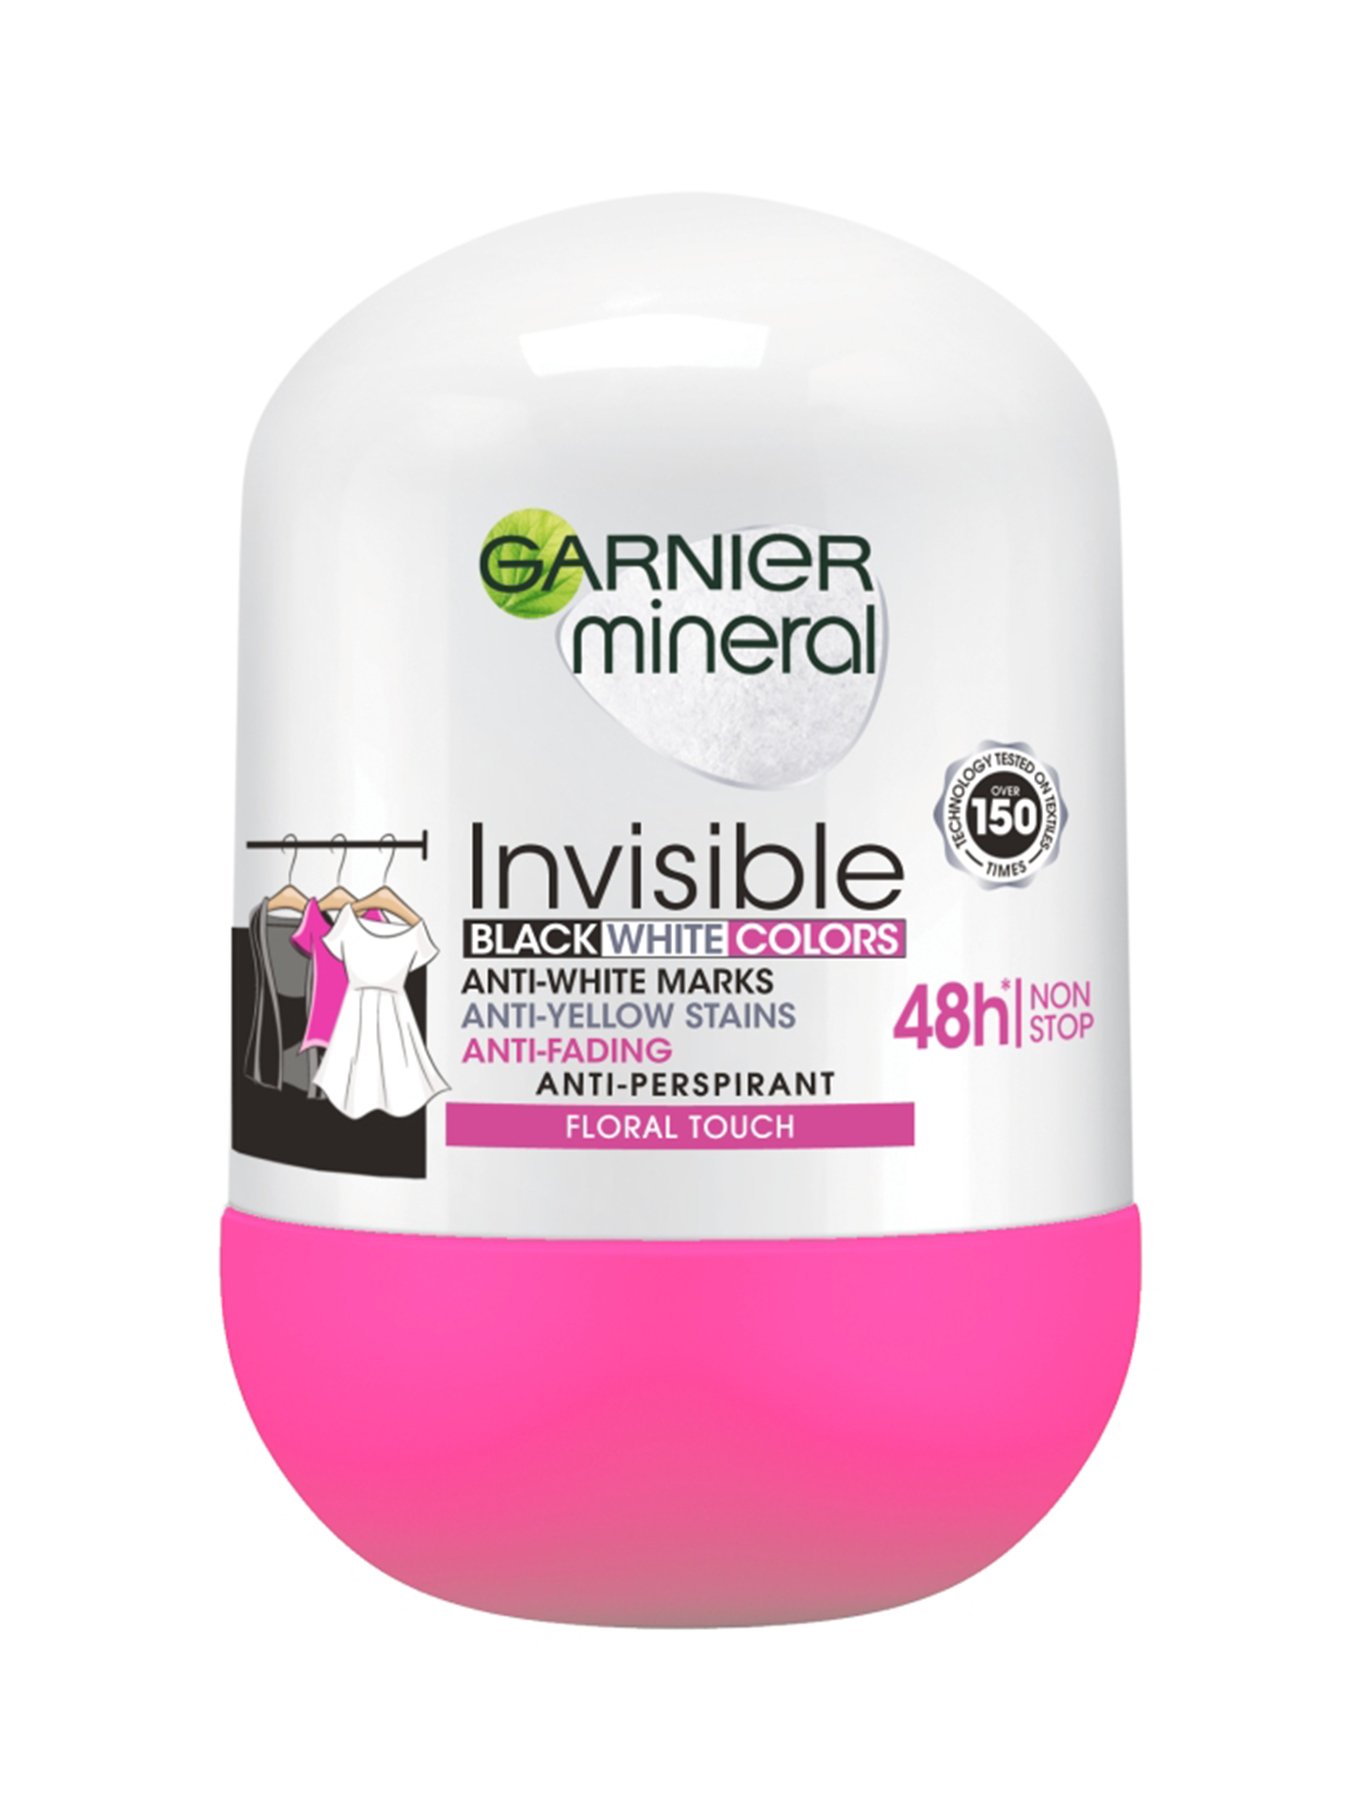 Garnier Mineral Deo Invisible Black, White & Colors Floral Roll-on